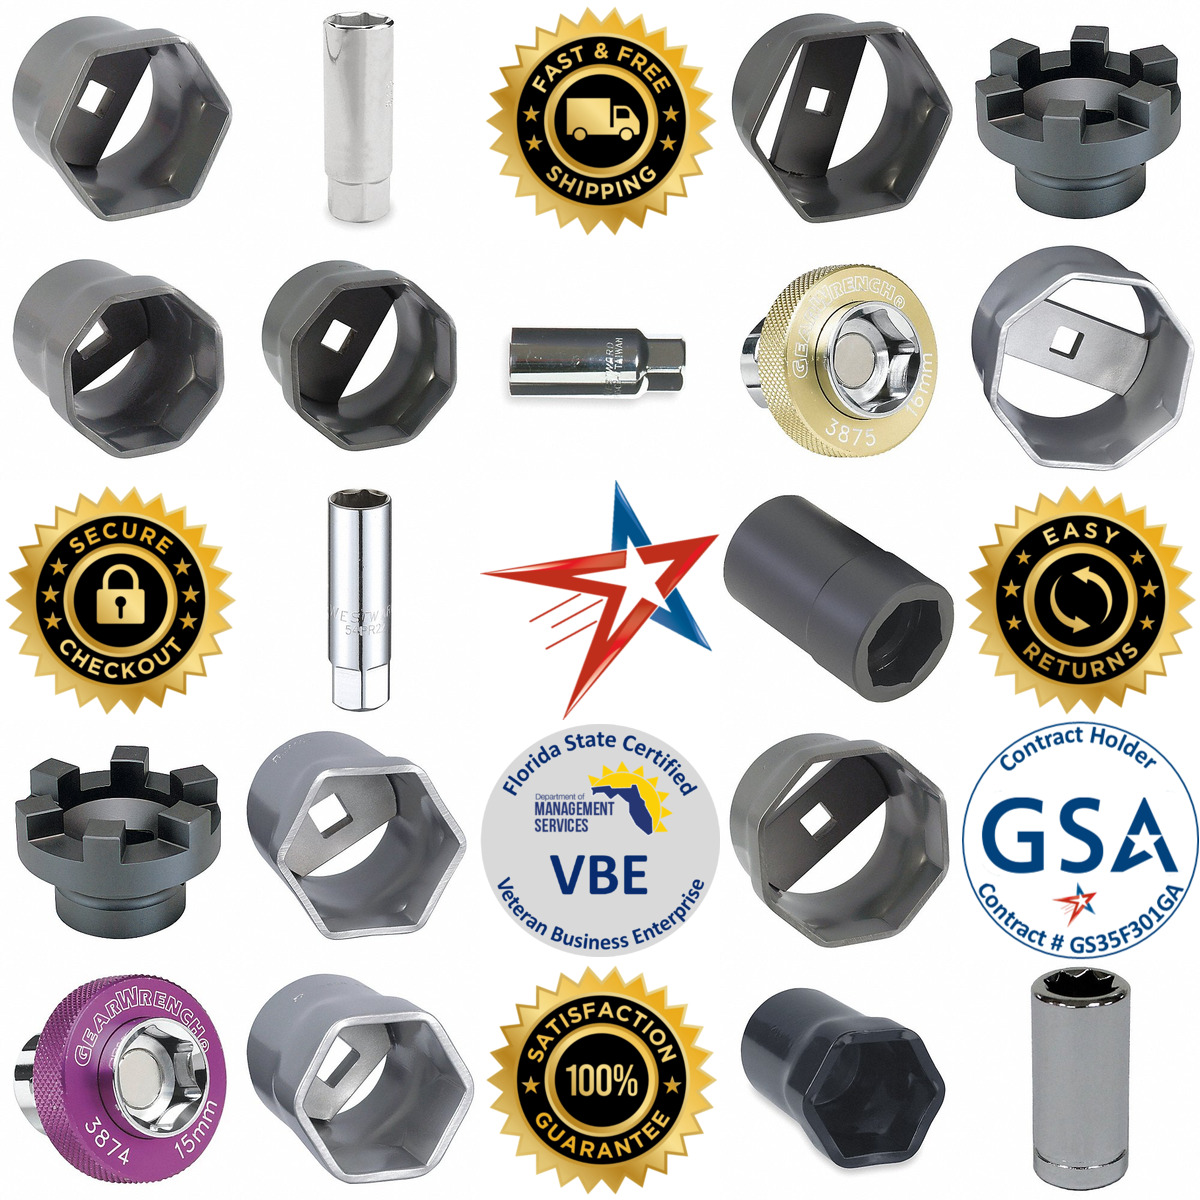 A selection of Automotive Sockets products on GoVets